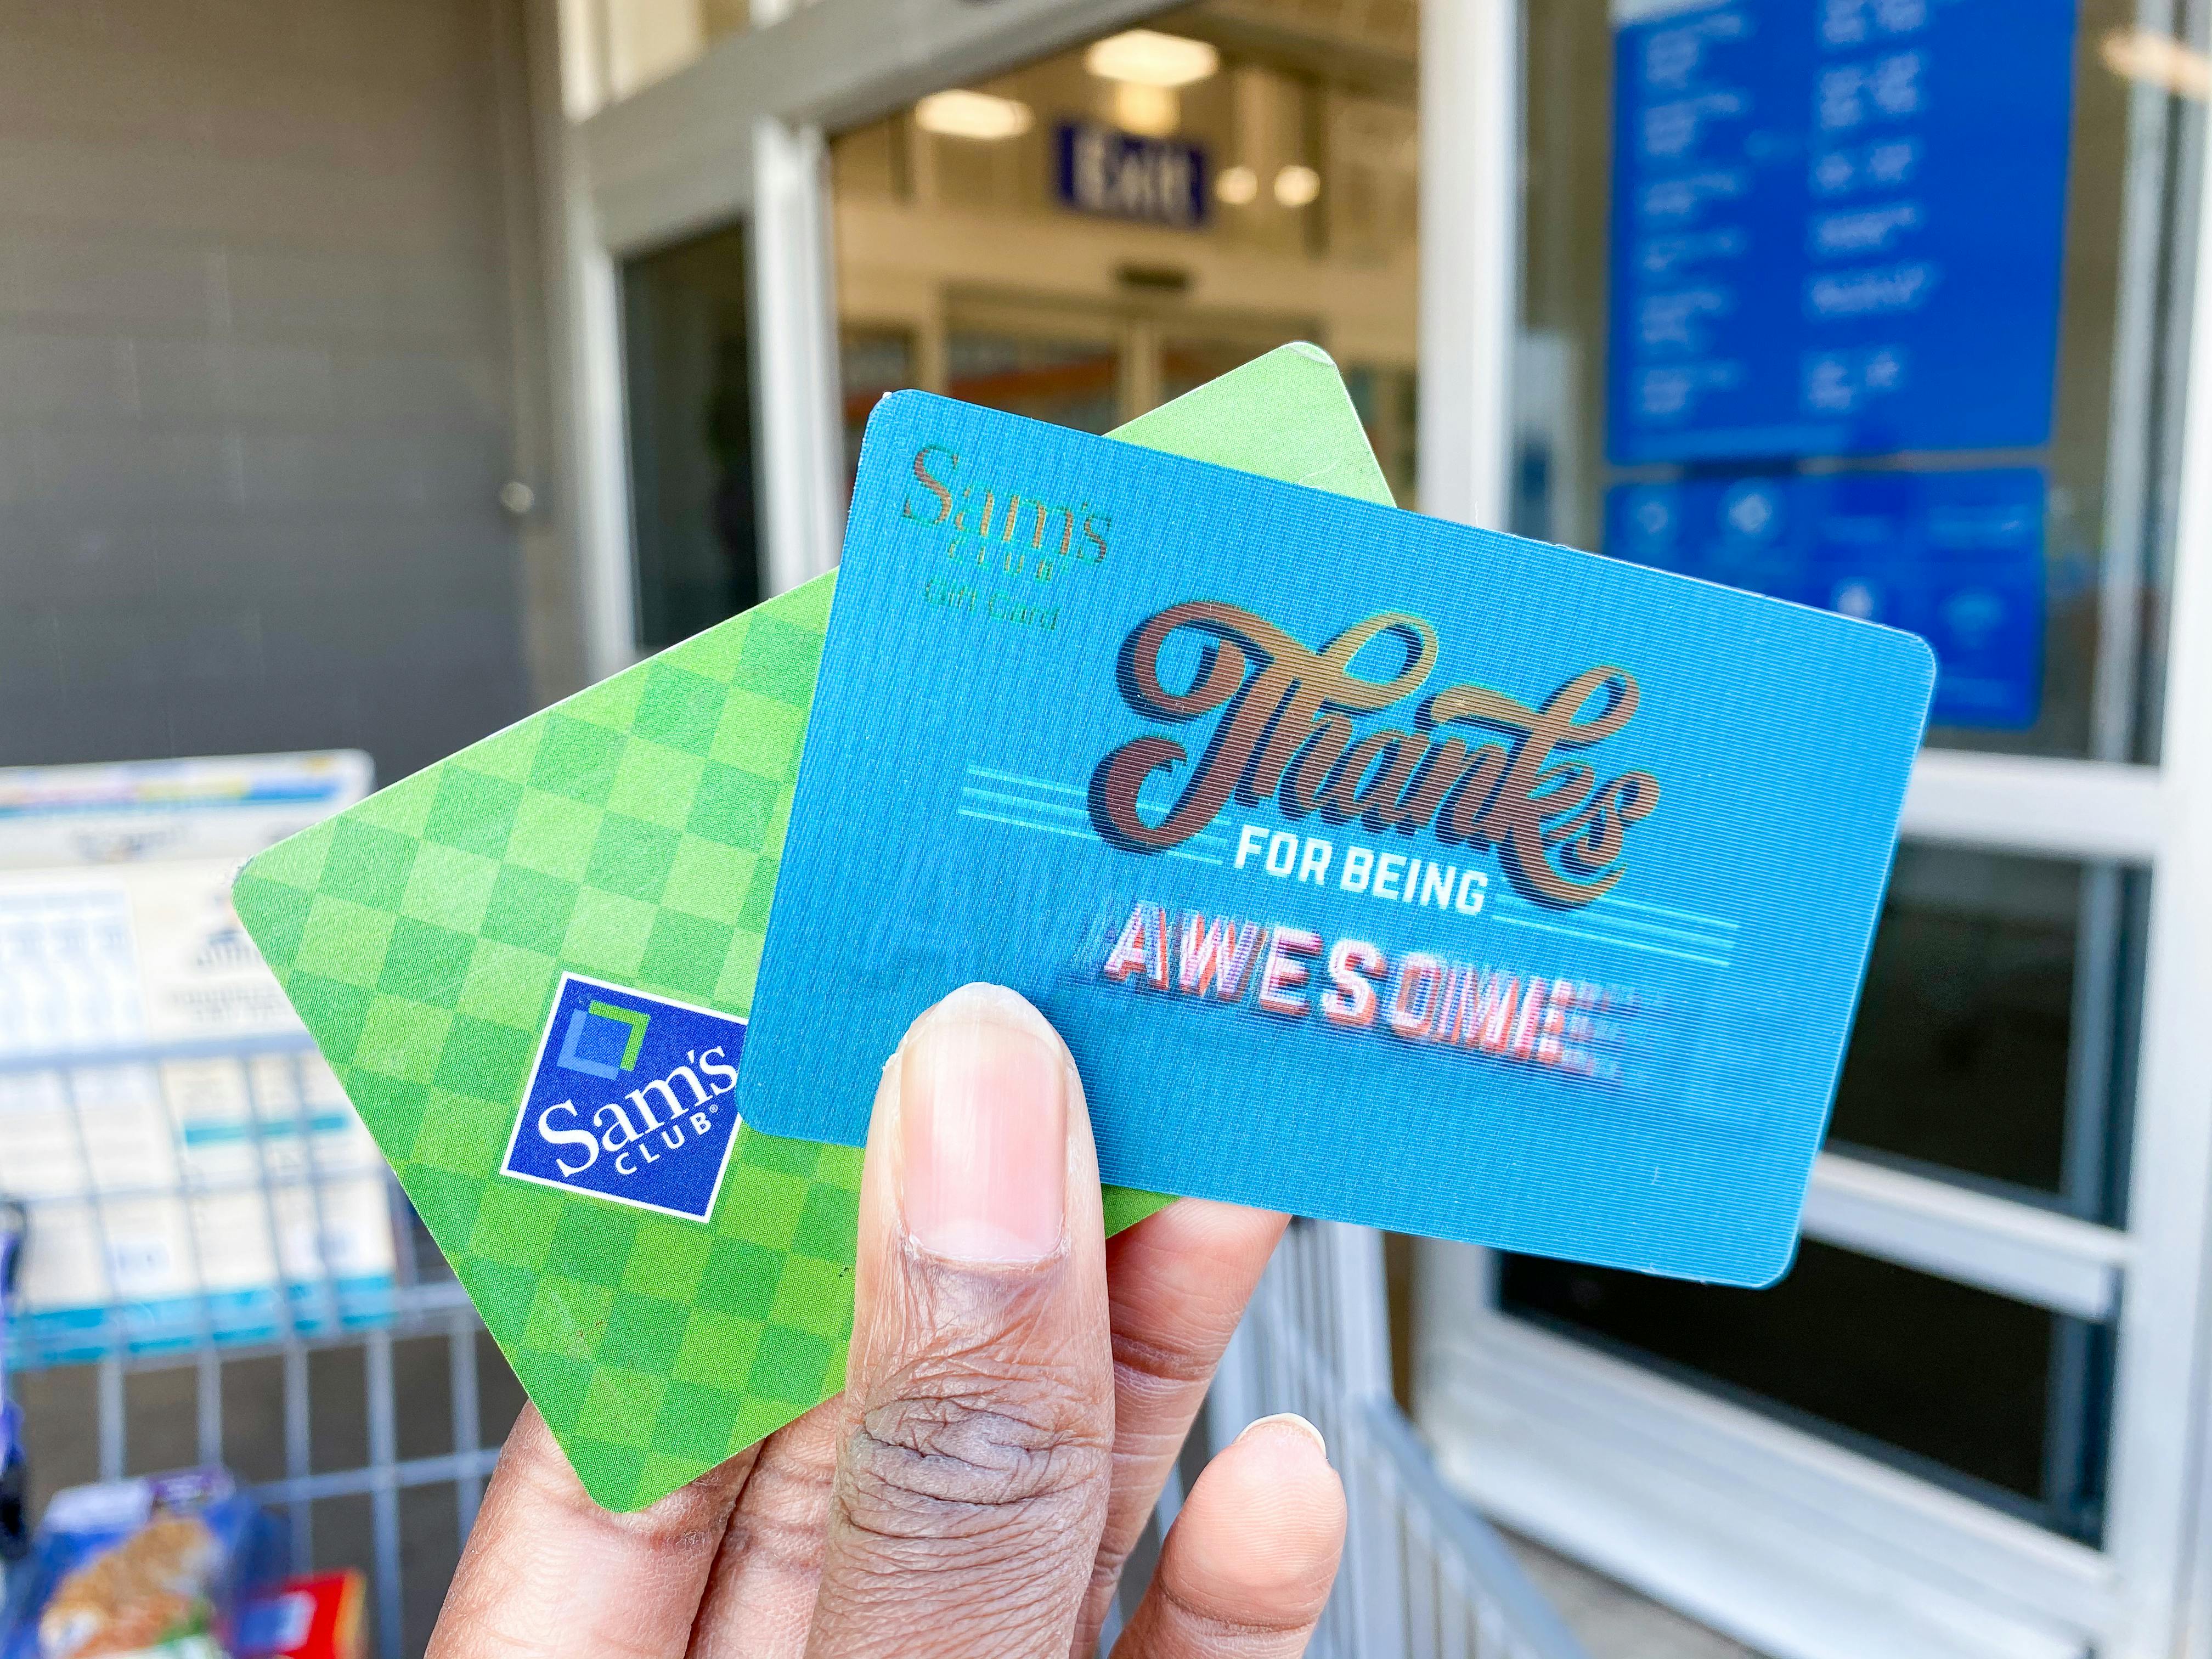 Sam's Club membership card and Sams club gift card being held in hand in front of Sams club entrance